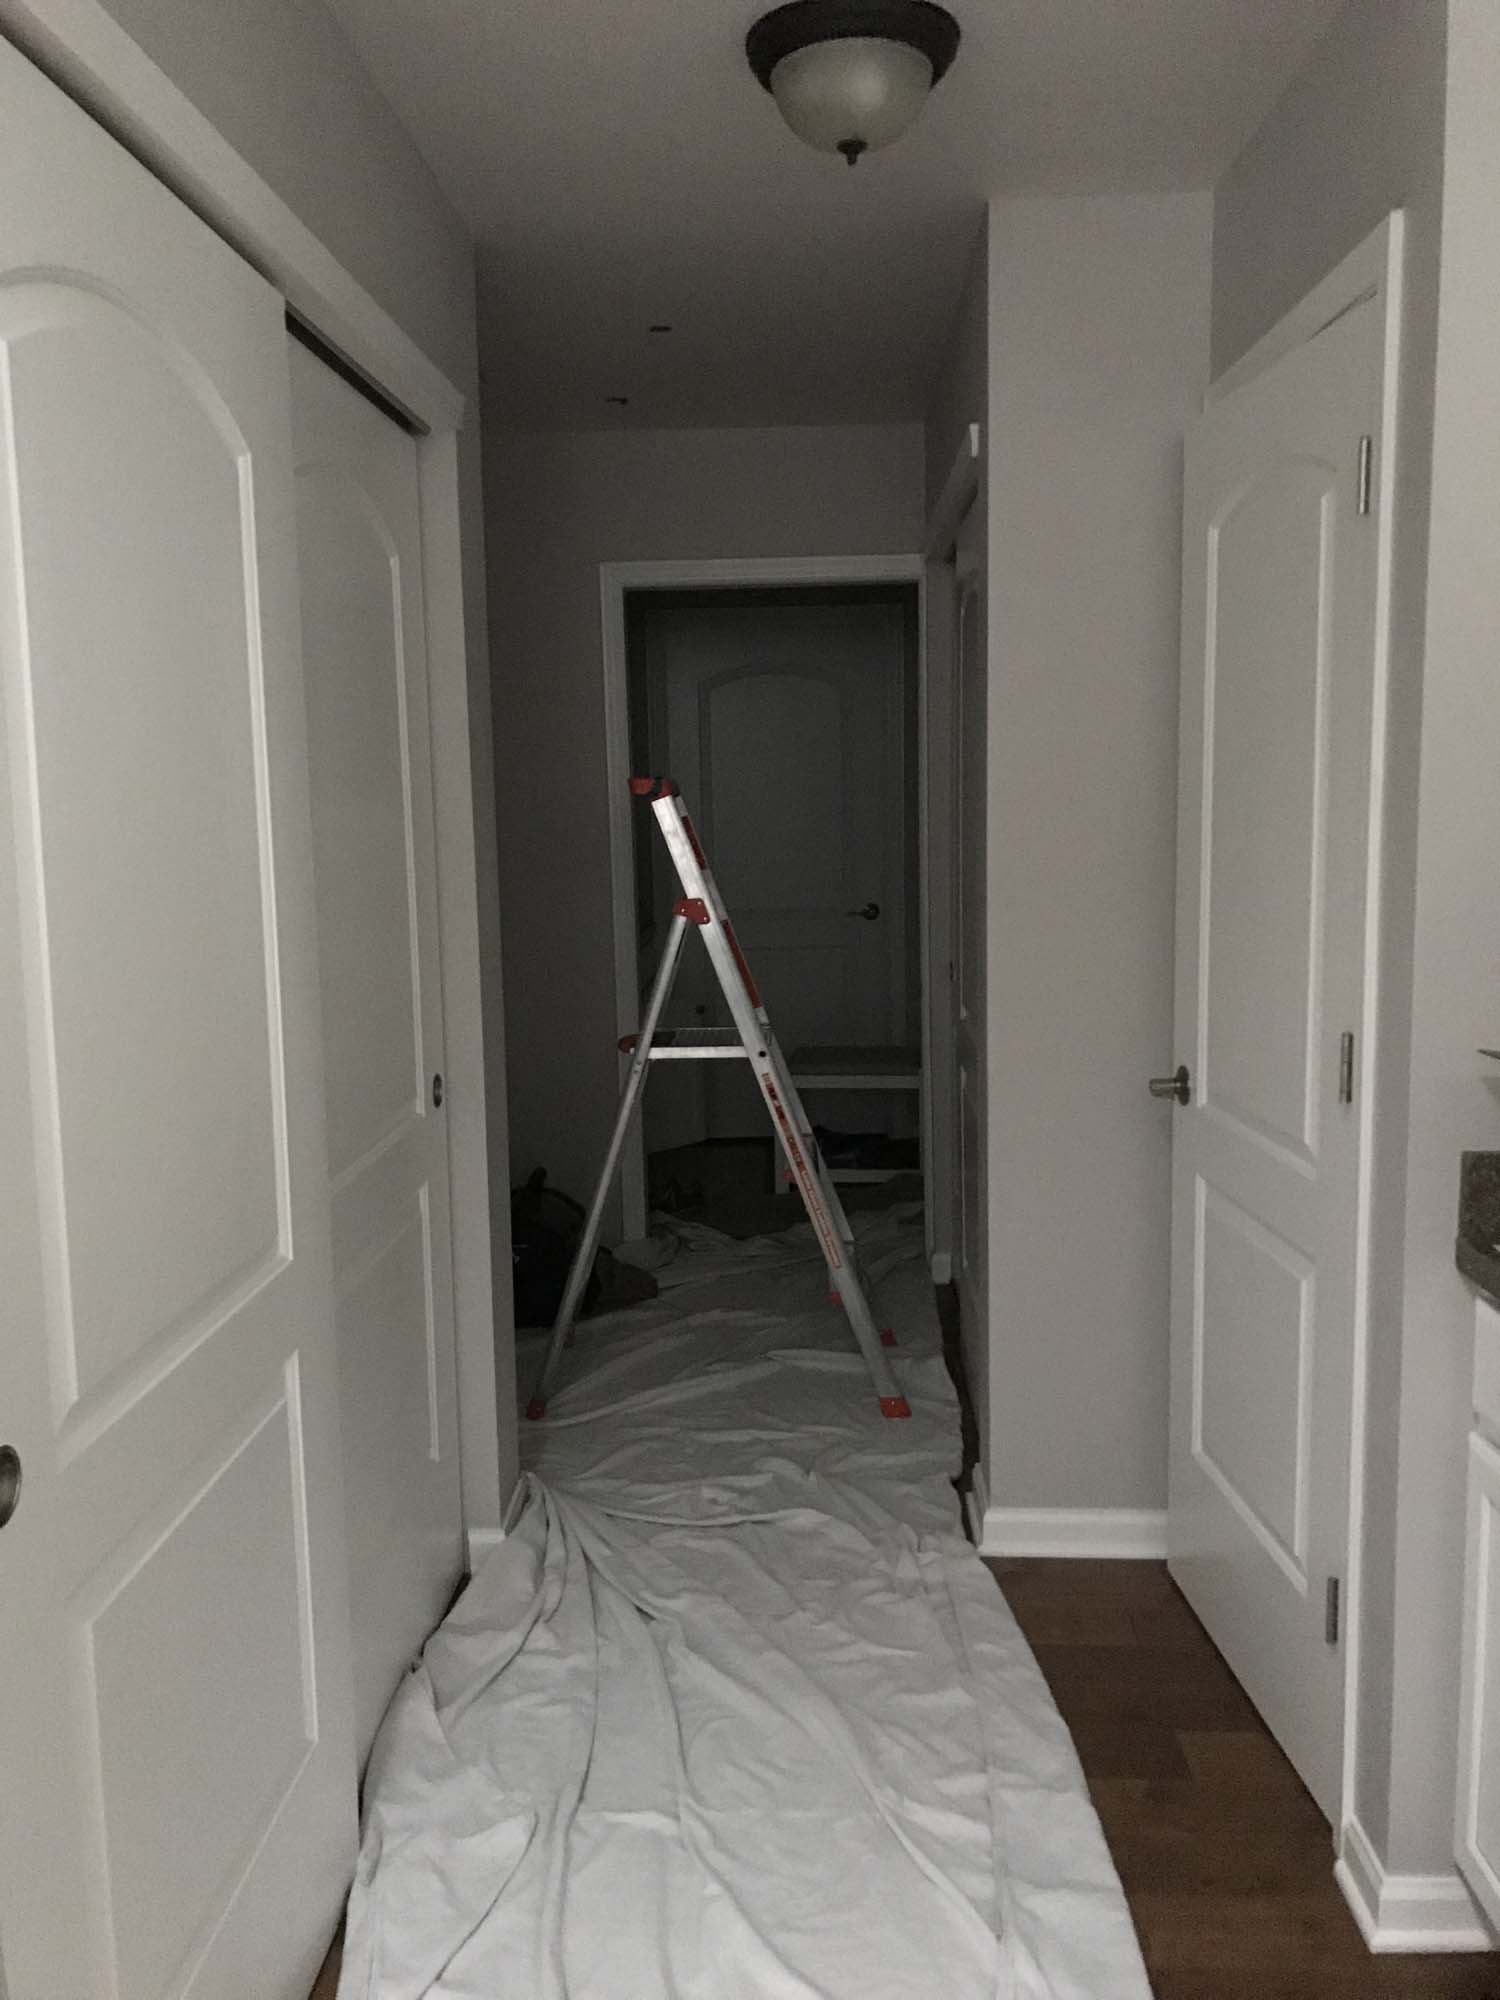 Ladder and drop-cloth sit in a home entry way before a skylight installation